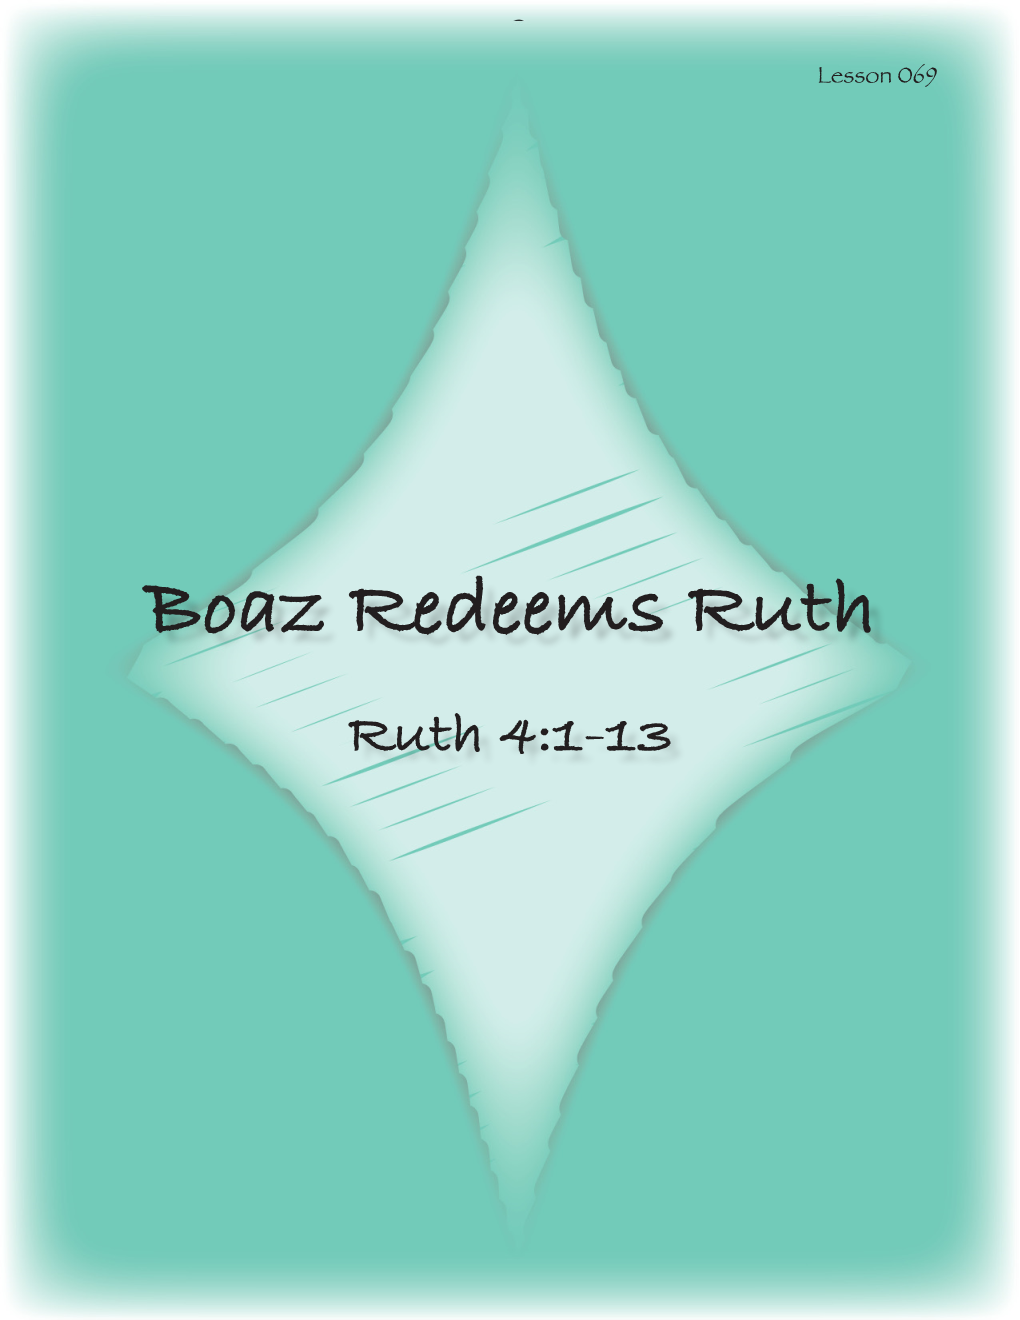 Boaz Redeems Ruth Ruth 4:1-13 MEMORY VERSE IS AIAH 47:4 “As for Our Redeem Er, the LORD of Hosts Is His Nam E, the Holy One of Israel.”